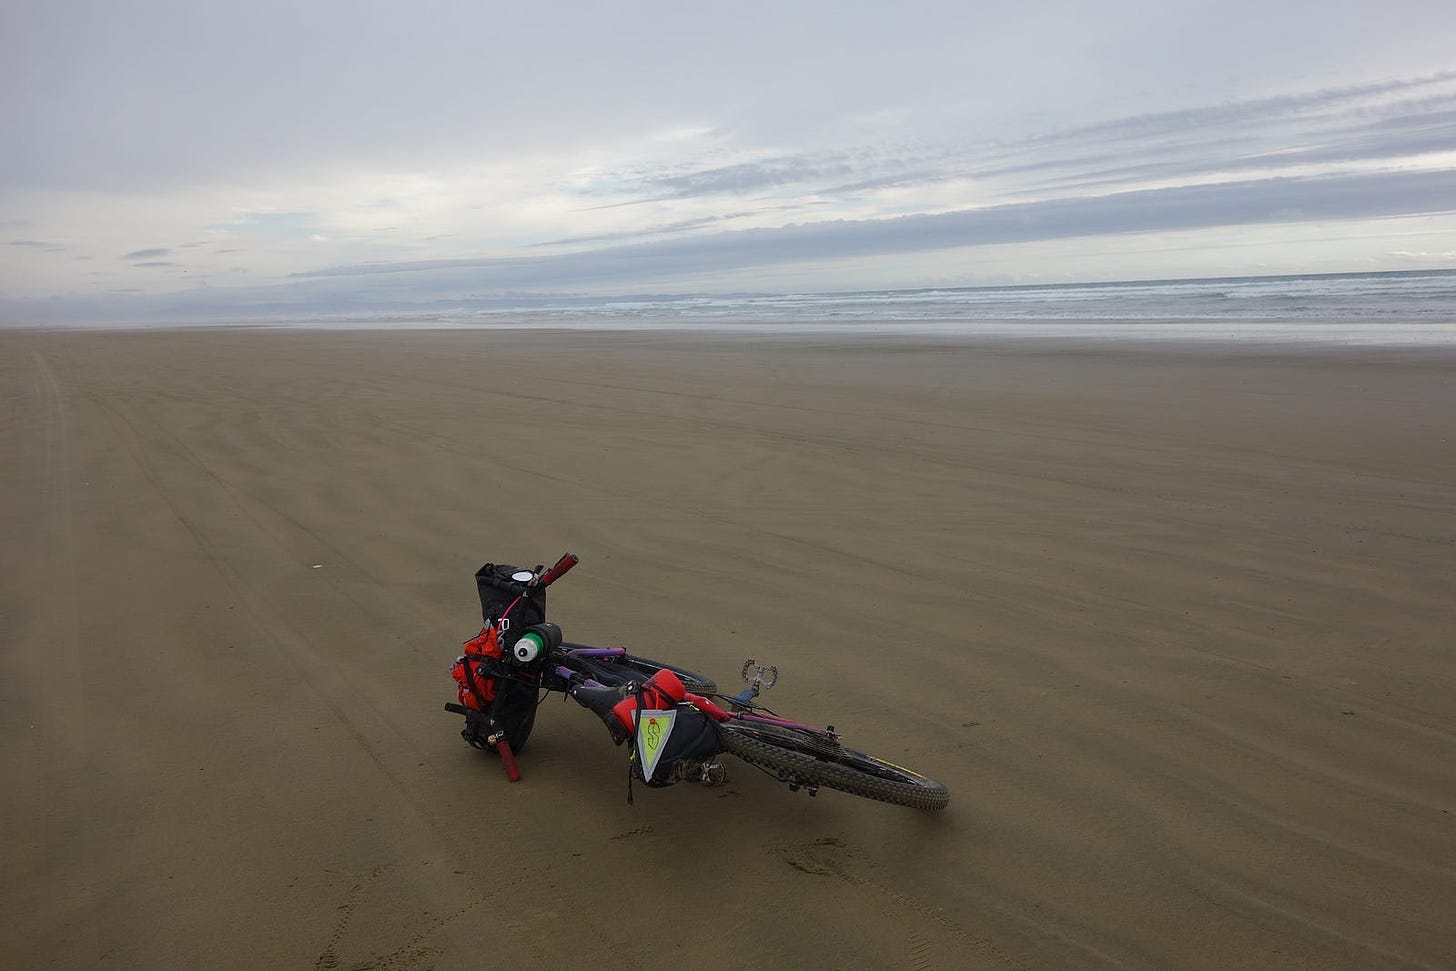 The bicycle is on the sand in the open expanses of ninety mile beach.